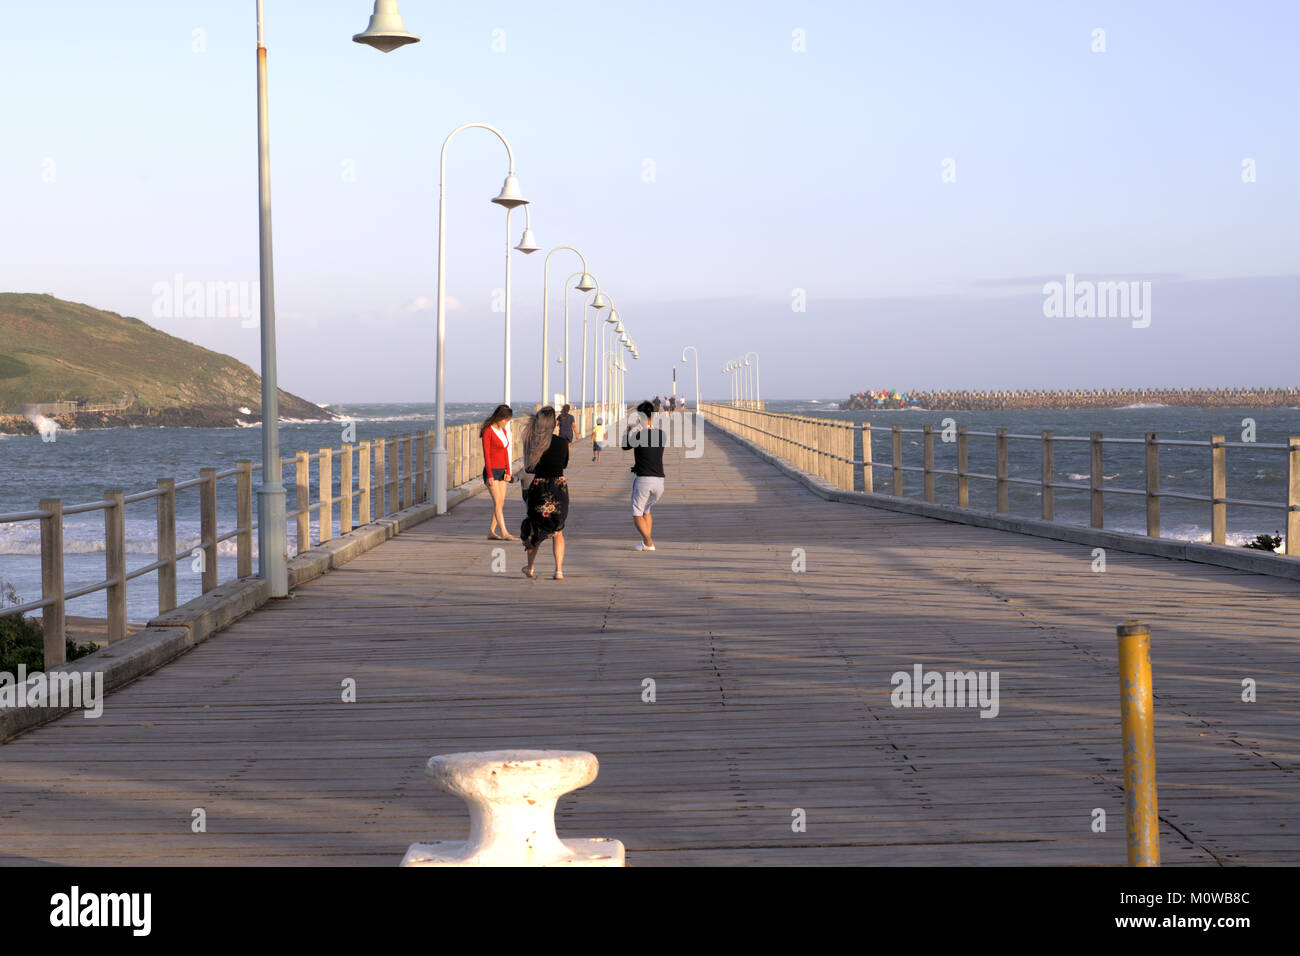 People walking at Jetty Coffs Harbour Australia during golden hour. Coffs Jetty is major Australian holiday destination. Dated 16 Jan 2018. Stock Photo